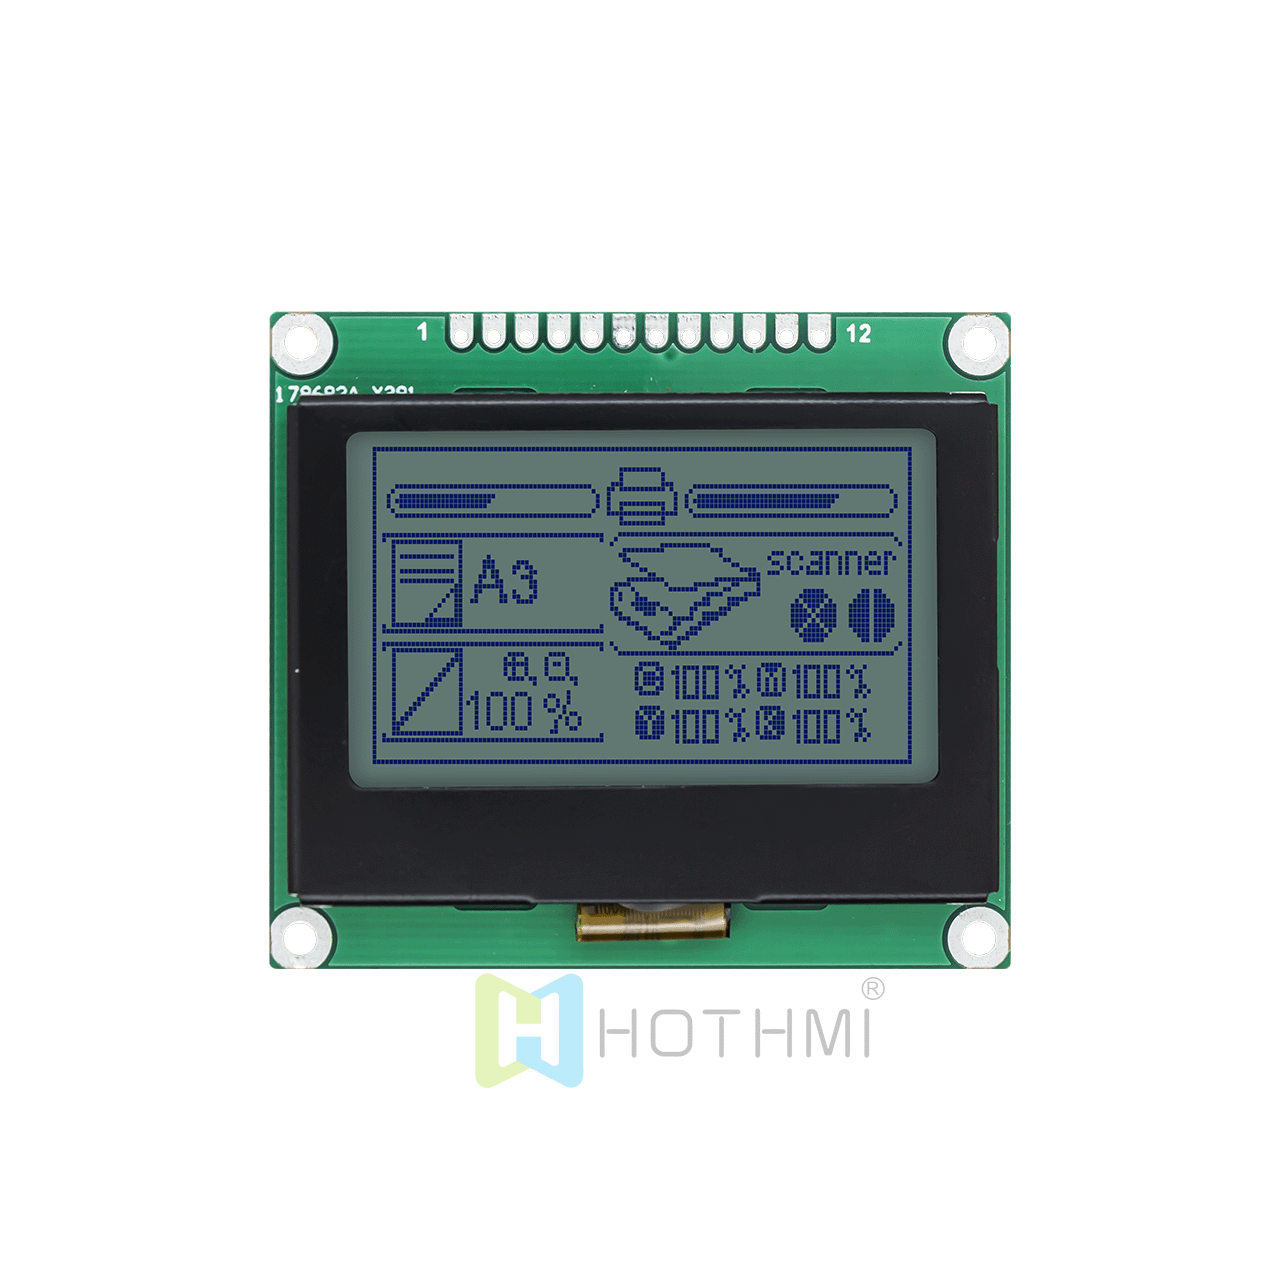 2-inch 12864 LCD Graphic Display Module | 128 X 64 Graphic Dot Matrix Module | STN Positive Display | SPI Interface | ST7567 Controller